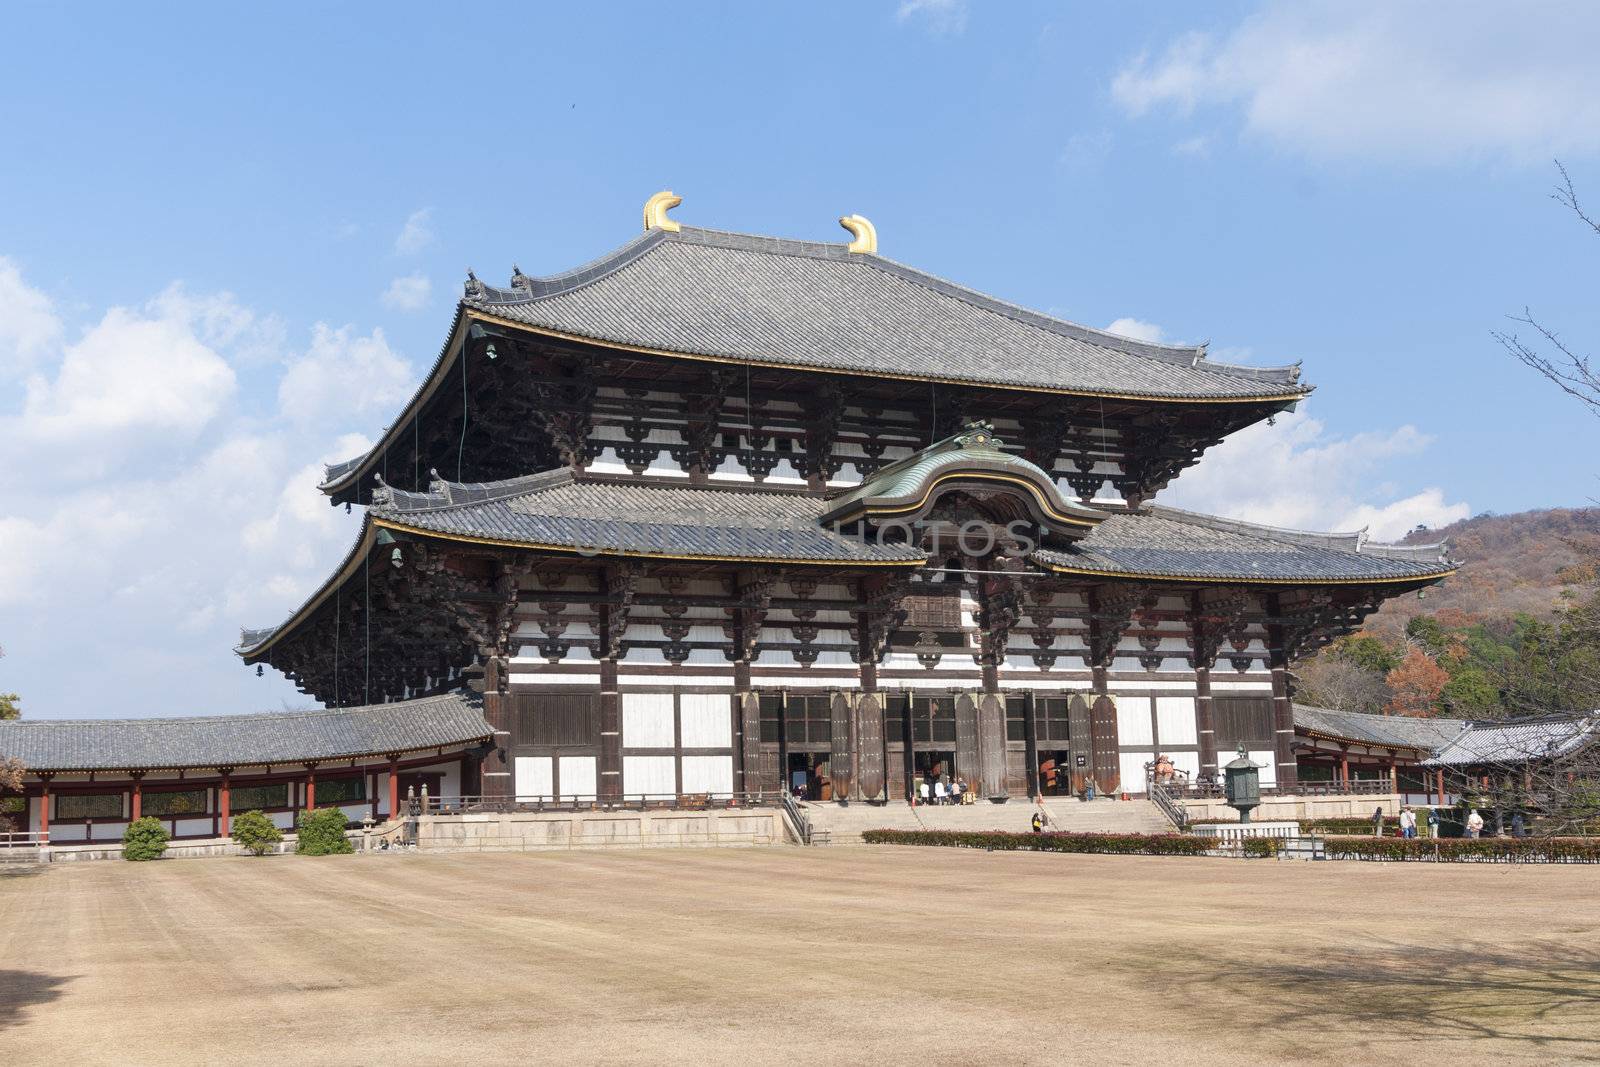 the world biggest wooden building - Todai-ji Temple in Nara, Japan with walking tourists, this building is 49 meters in height and is well-known as the Great Buddha hall